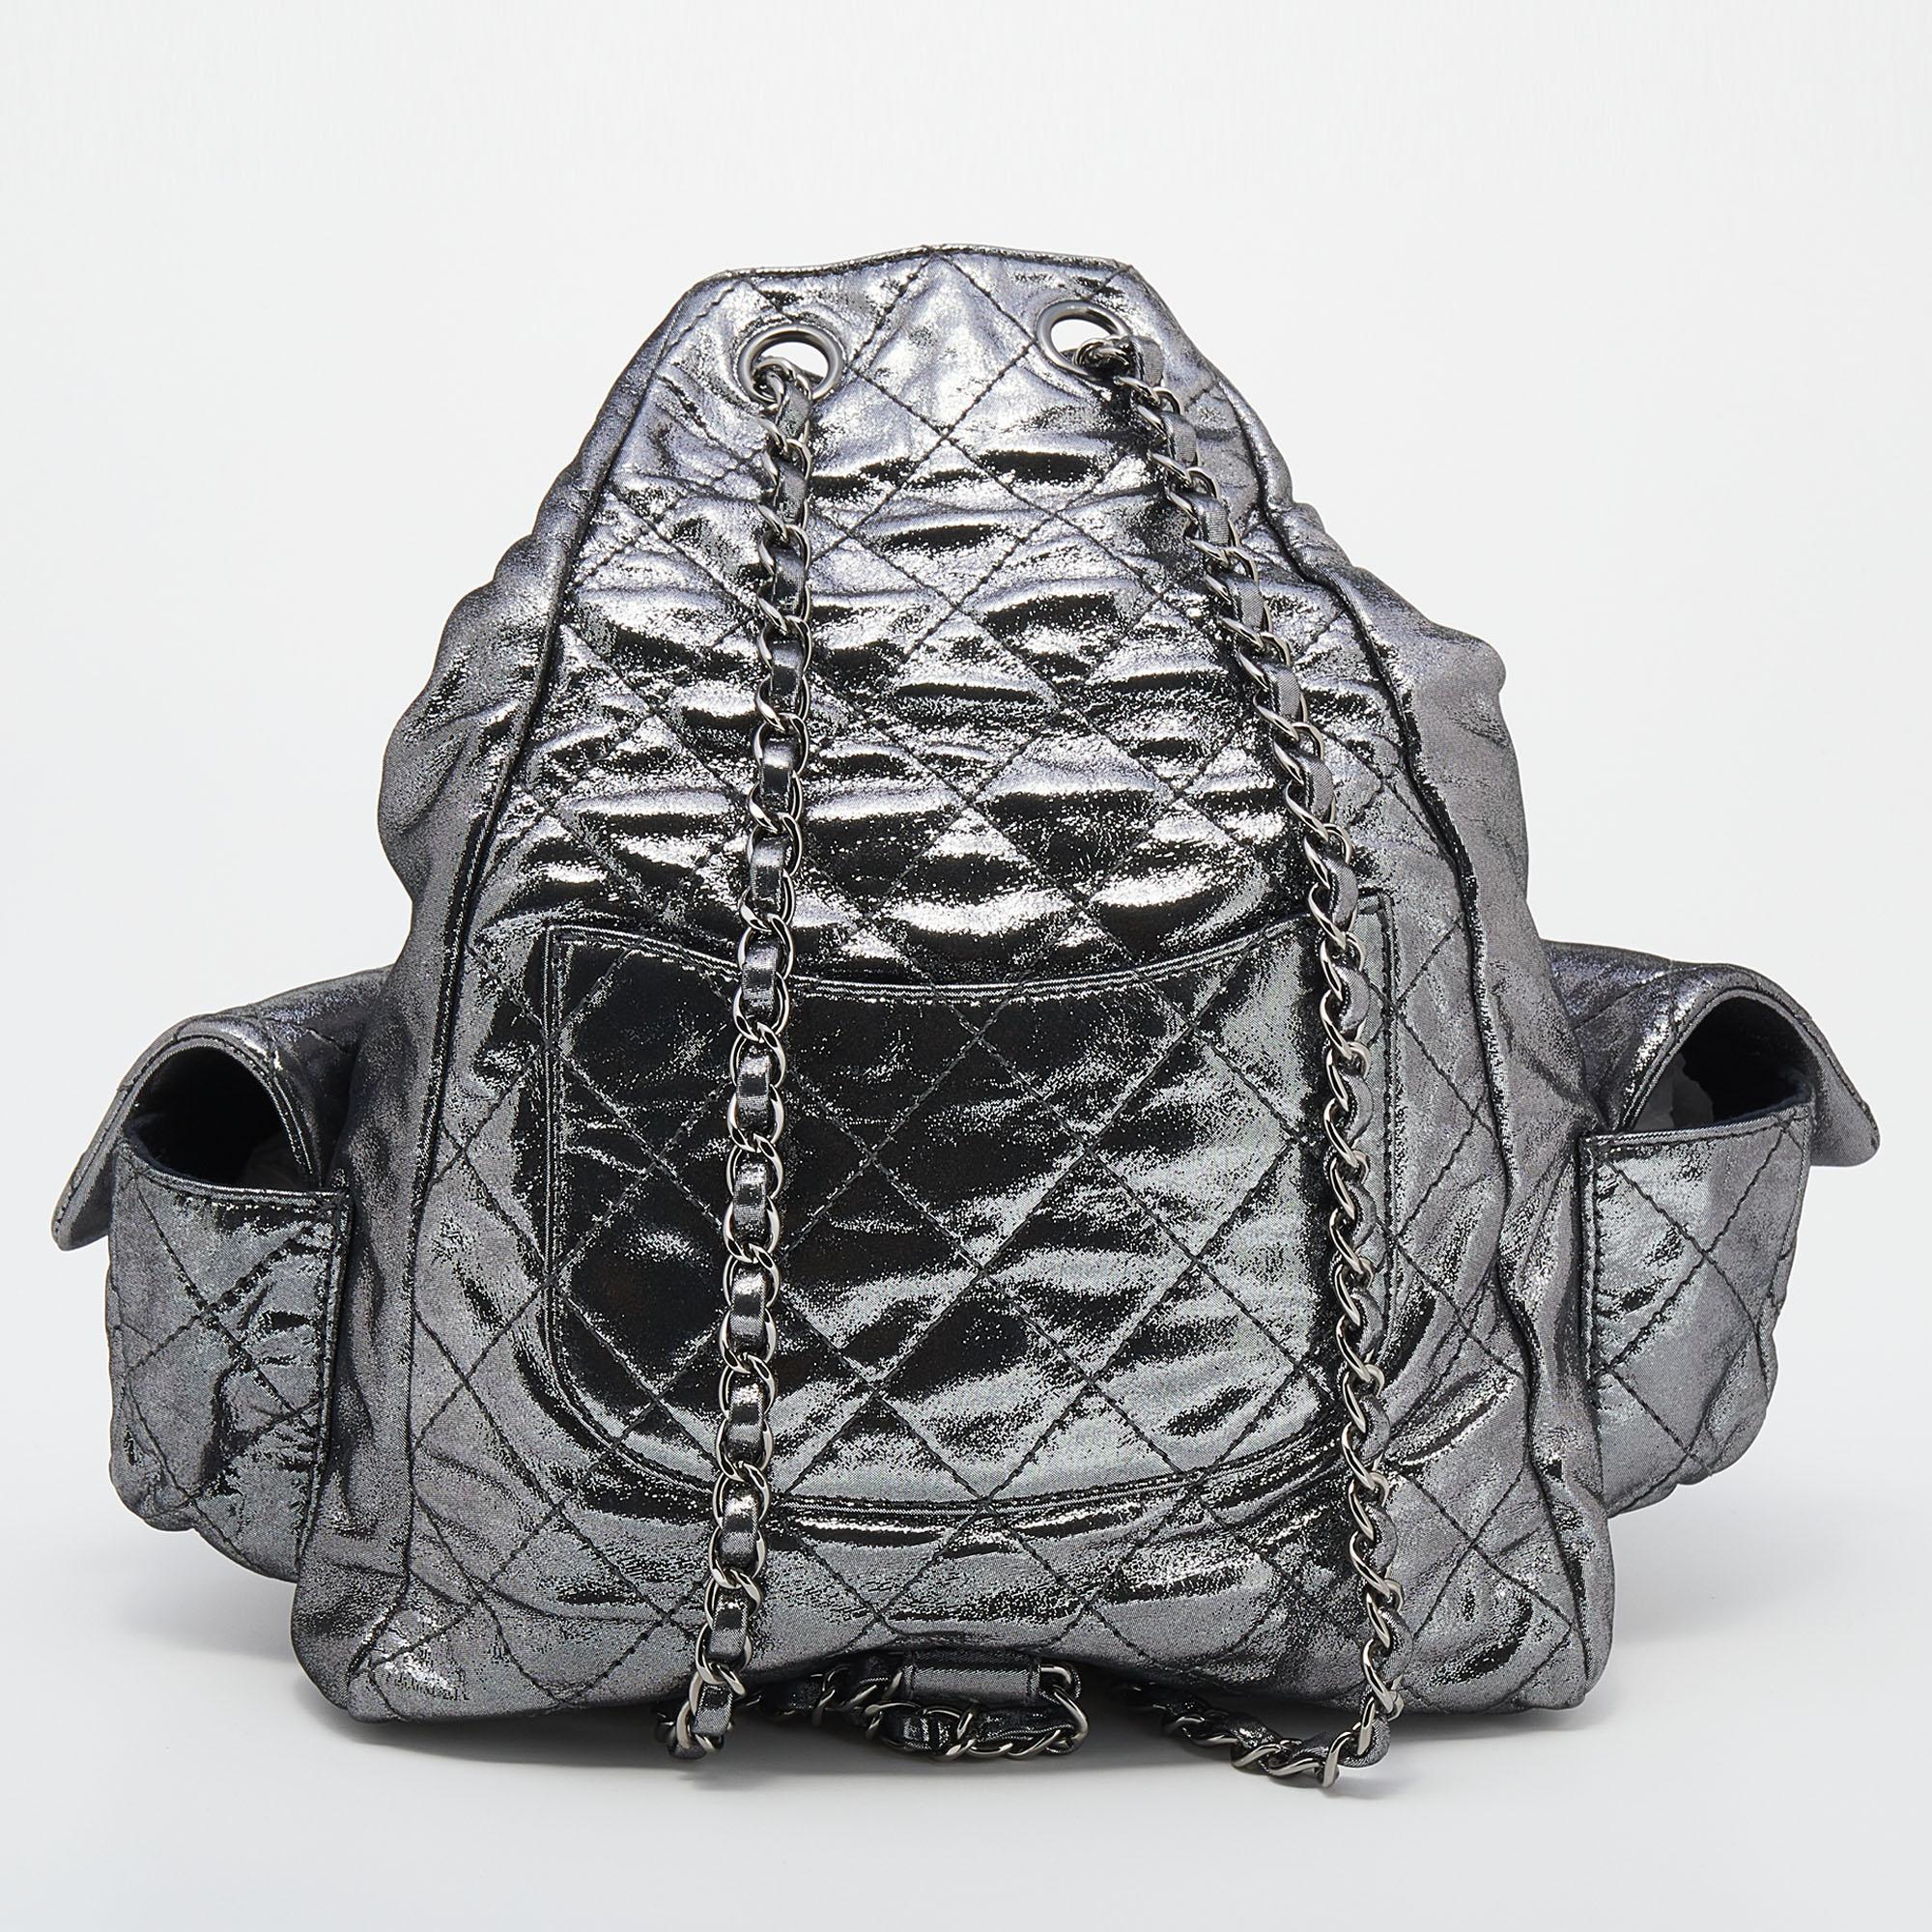 Inspiring and revolutionary designs mark the identity of Chanel. This Backpack is Back backpack is from the Fall 2012 collection and exemplifies faultless construction. Created from leather with quilted detailing, the front flap pockets of the bag